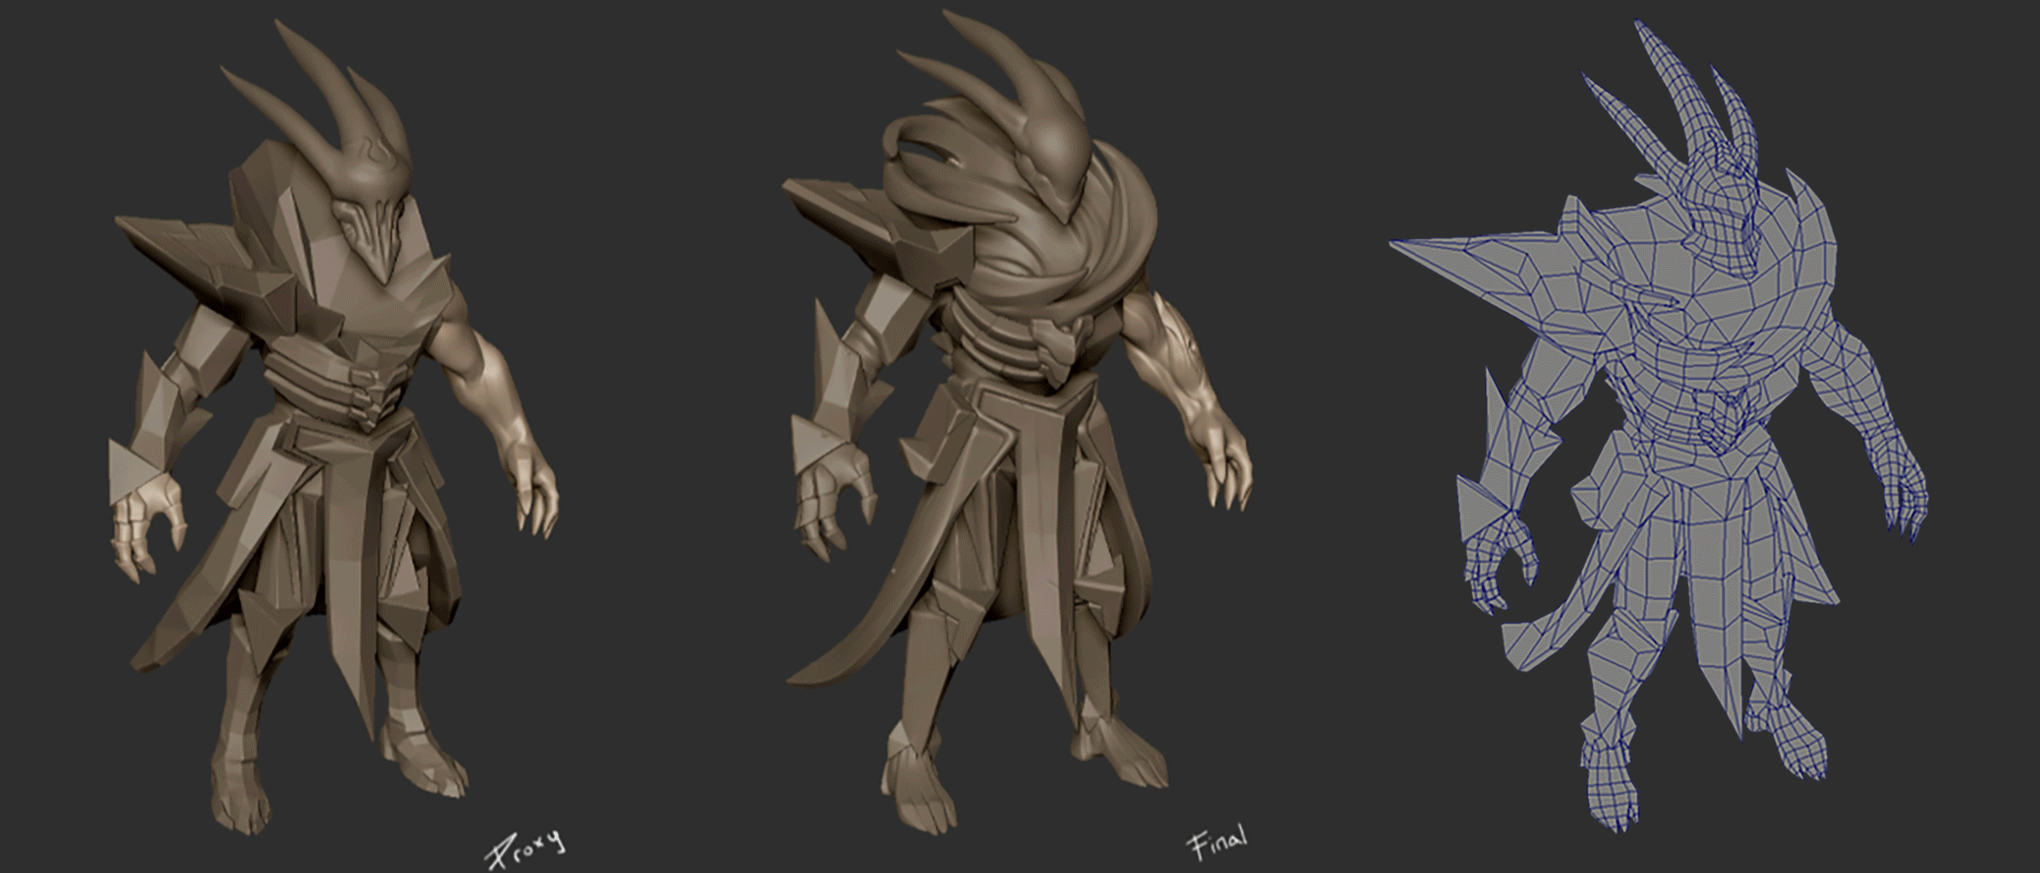 Early and Final Versions of Dark Star Thresh’s Model & Polygon Layover on Painted Final Model